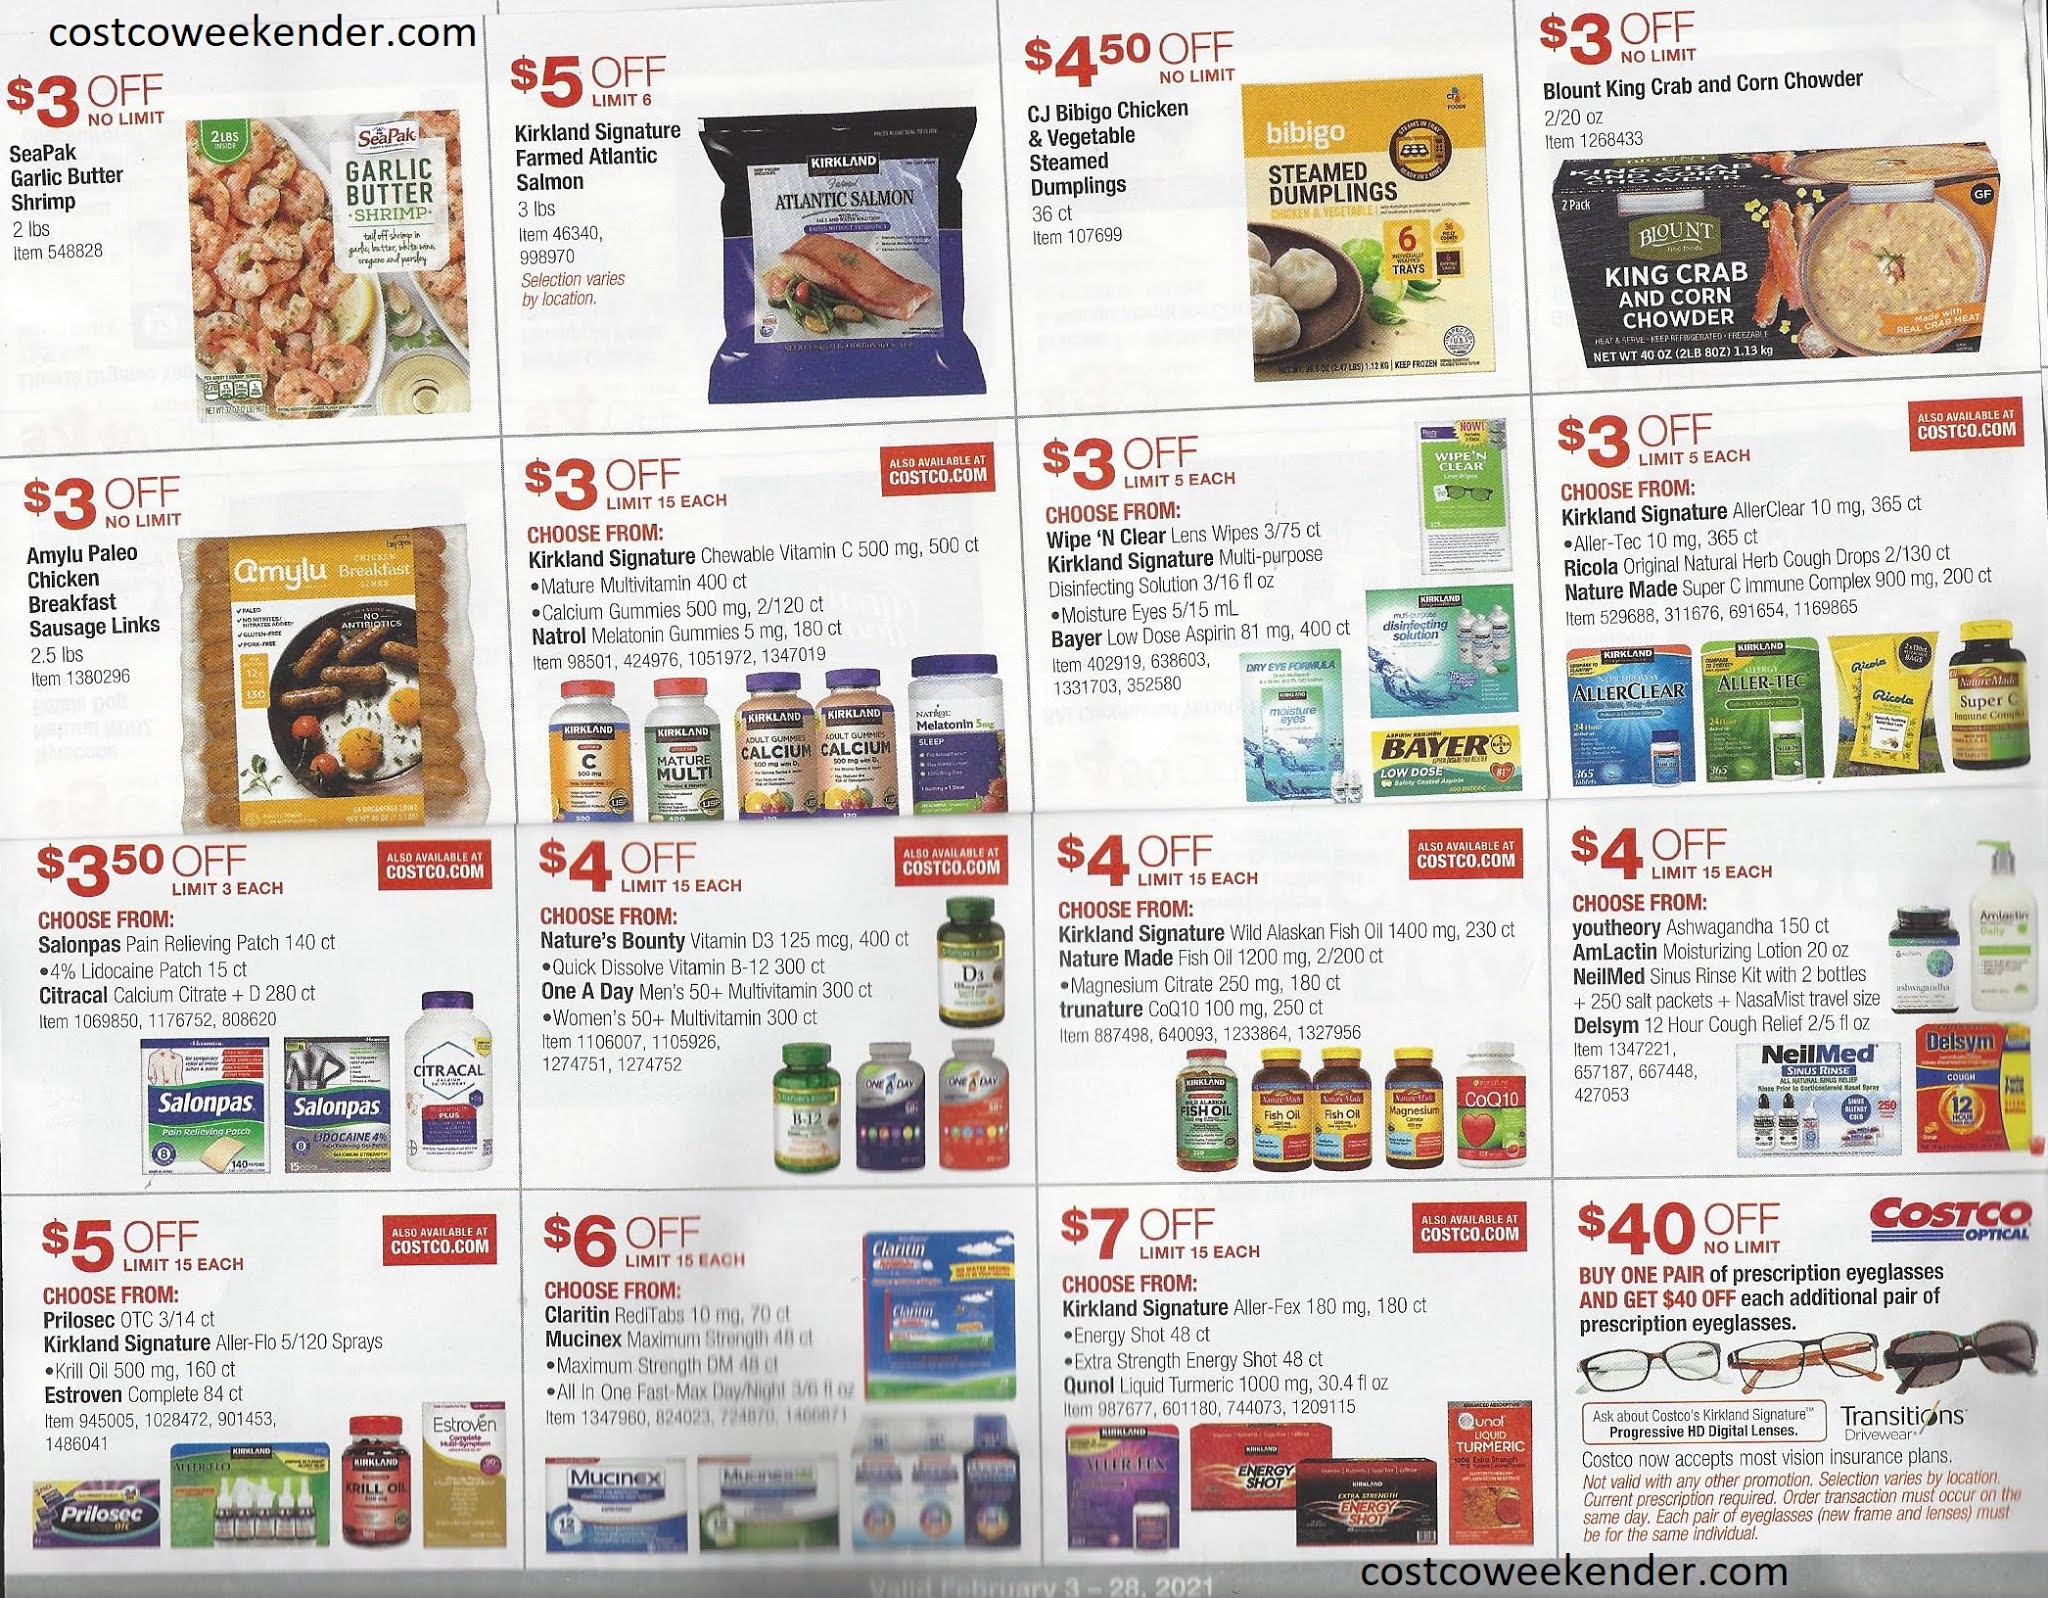 February 2021 Costco Coupon Book Costco Weekender